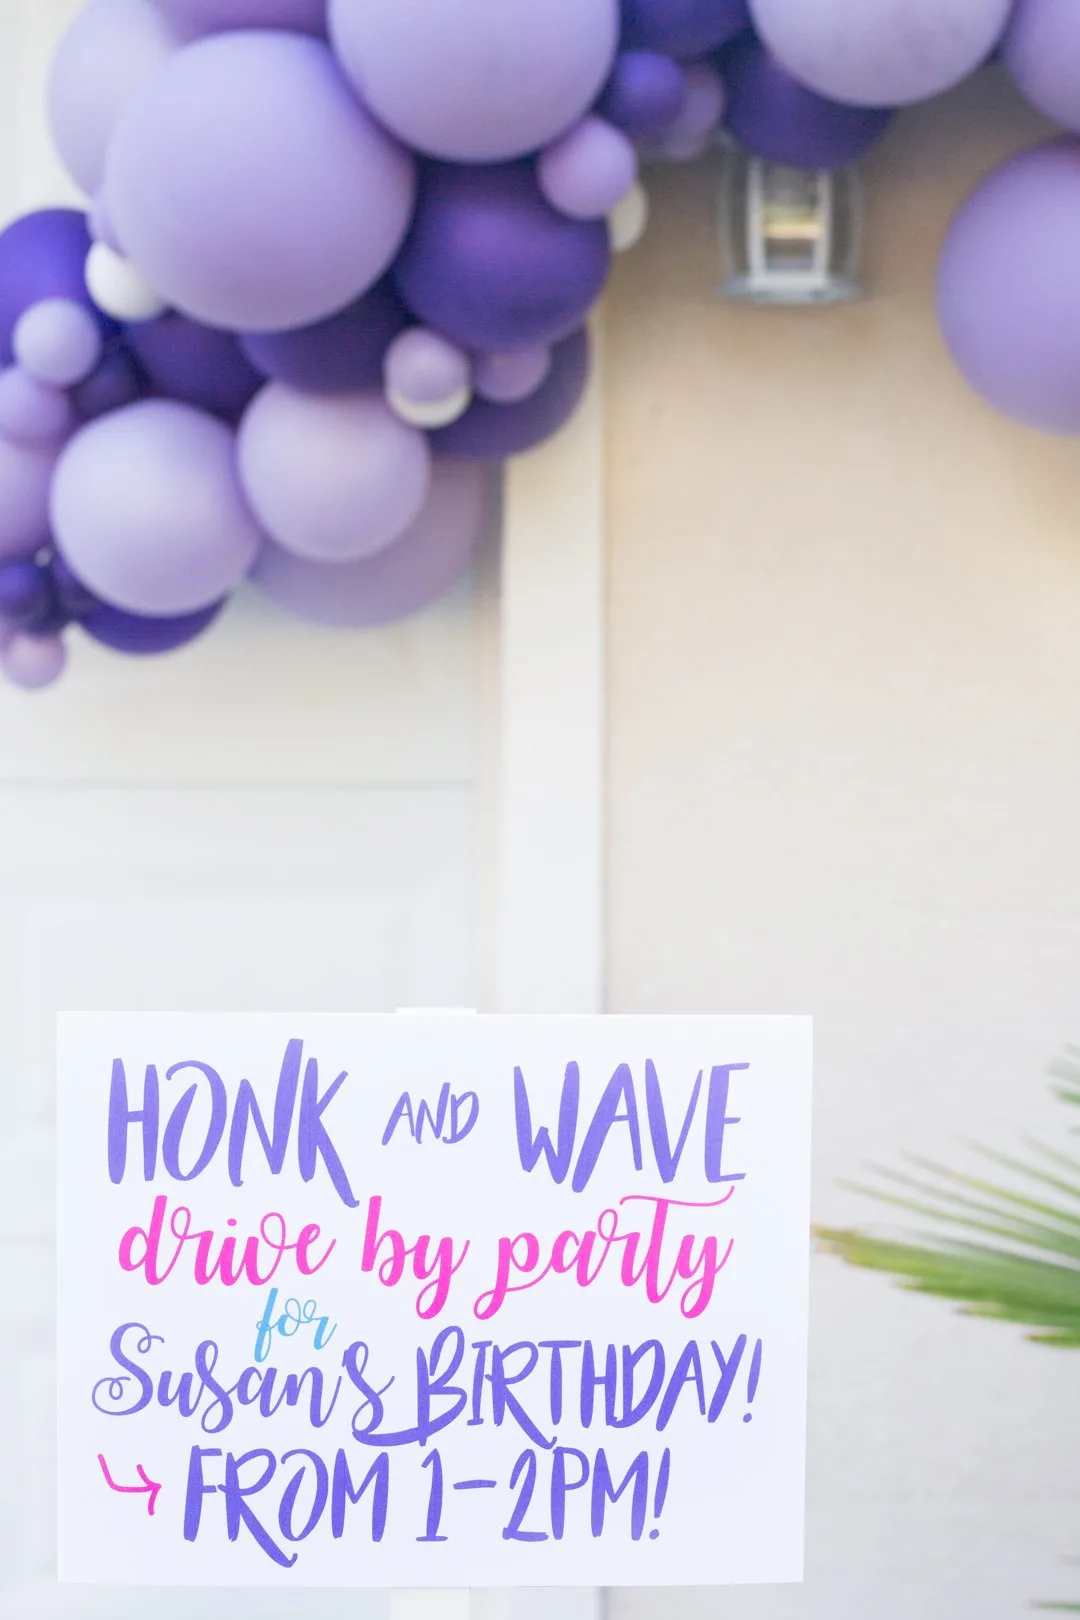 Drive By Party Sign and Balloons